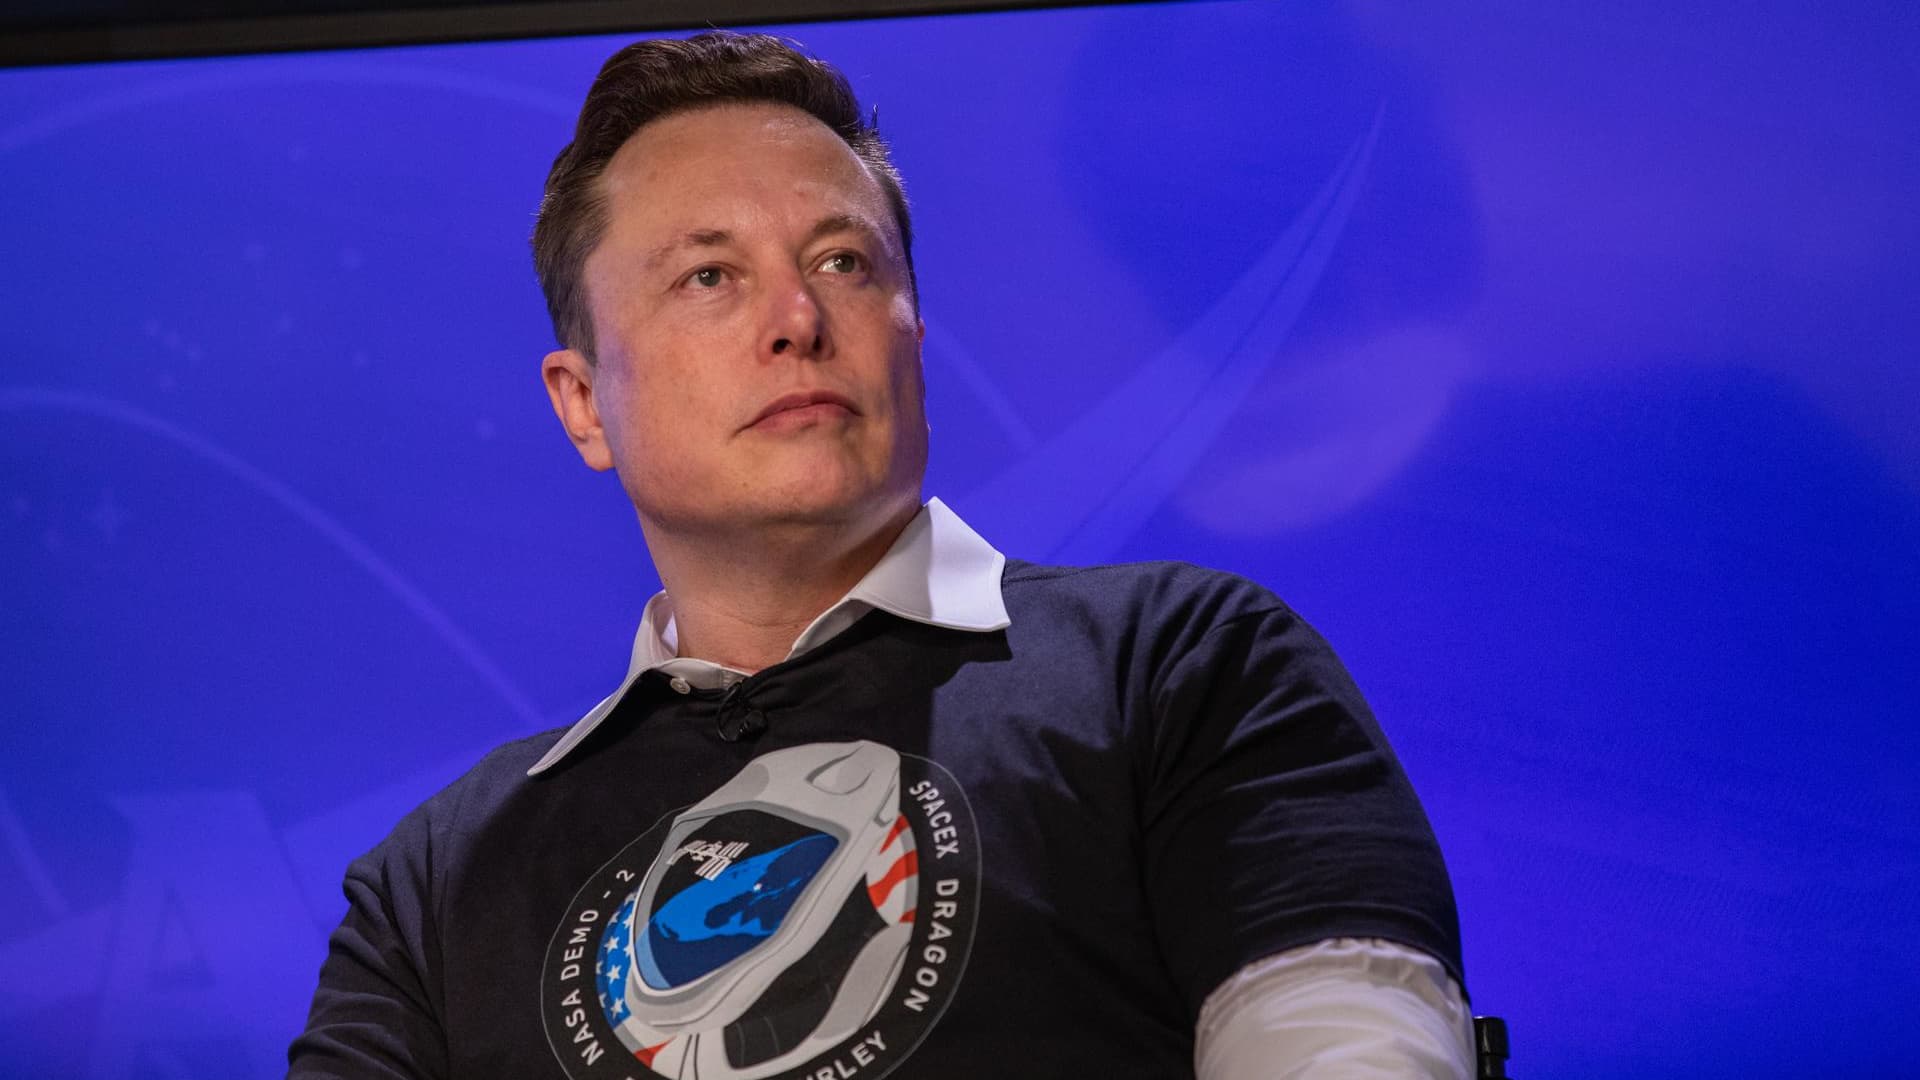 SpaceX paid to settle Elon Musk sexual misconduct claim, report says